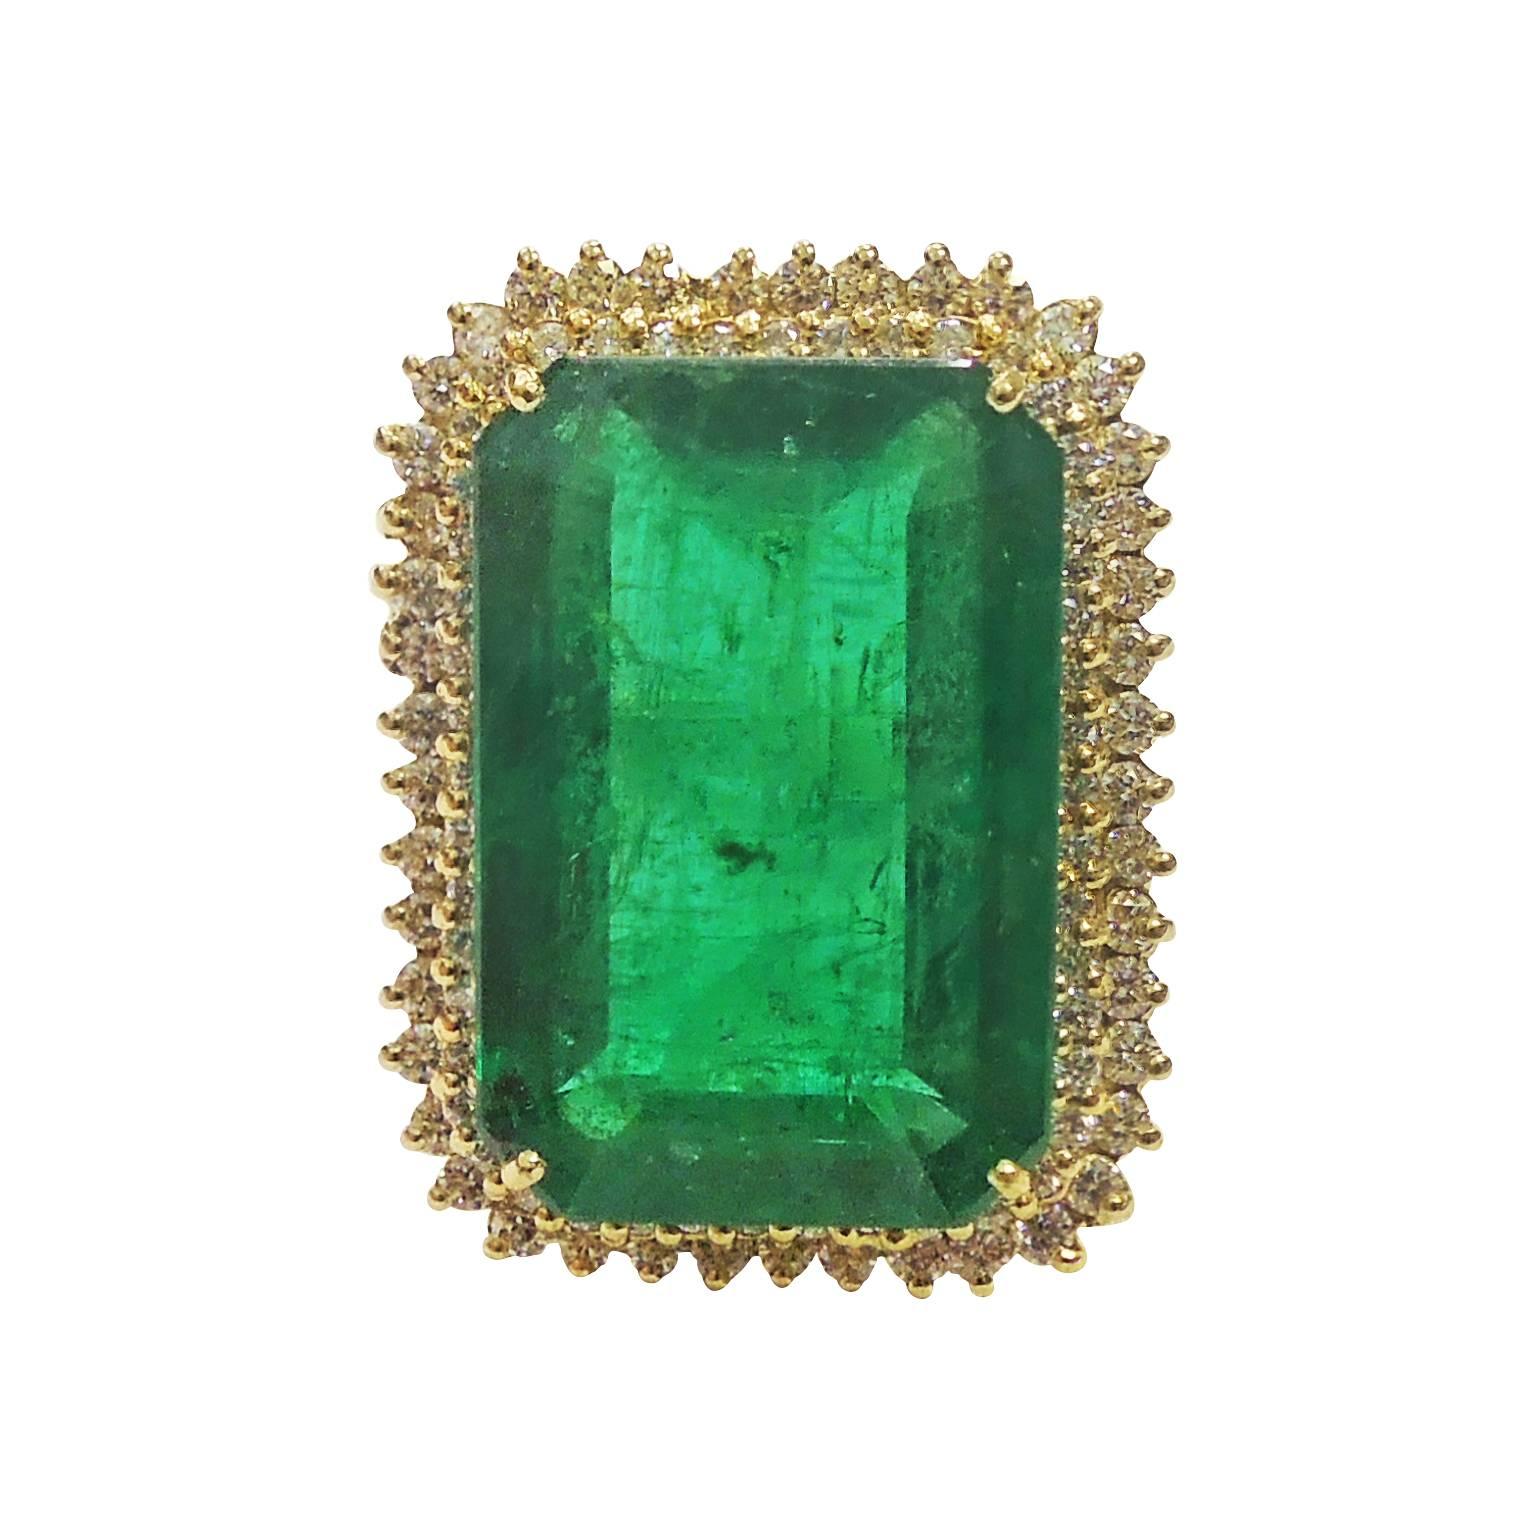 18K Gold Ring with Emerald center and Diamonds

19.03ct. Emerald. Very beautiful color.

1.50ct. Diamonds surrounding center stone. 

Face of ring is 0.8 inch x 1 inch

Currently size 6.25. Can be sized.